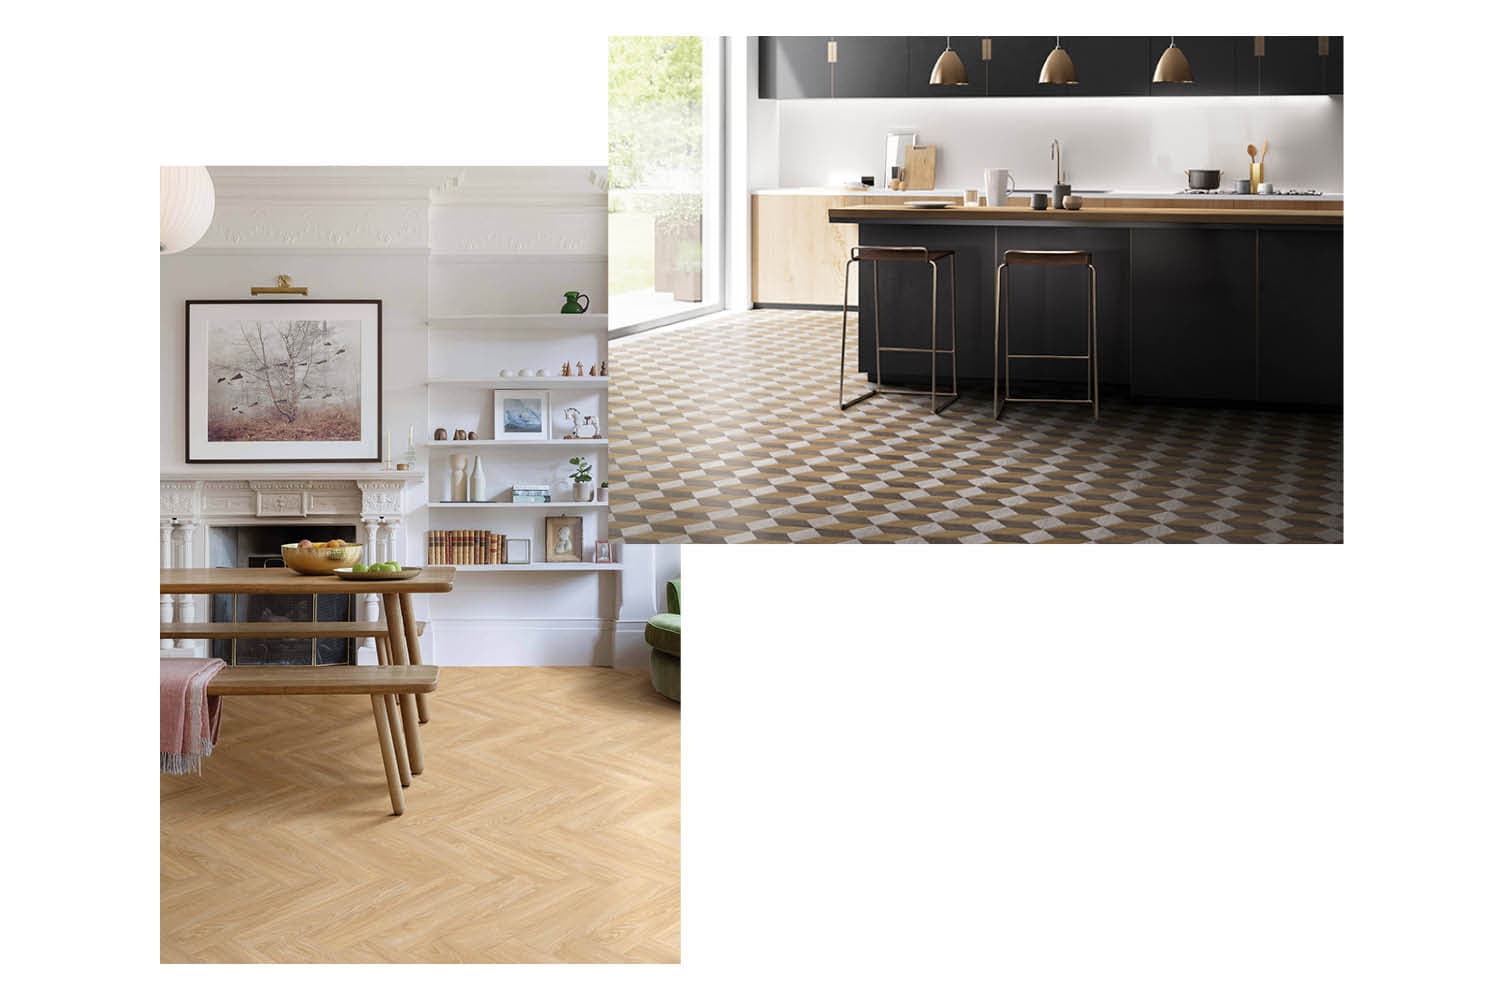 Two interior views: one showing a wood vinyl floor and one showing a Moods vinyl floor